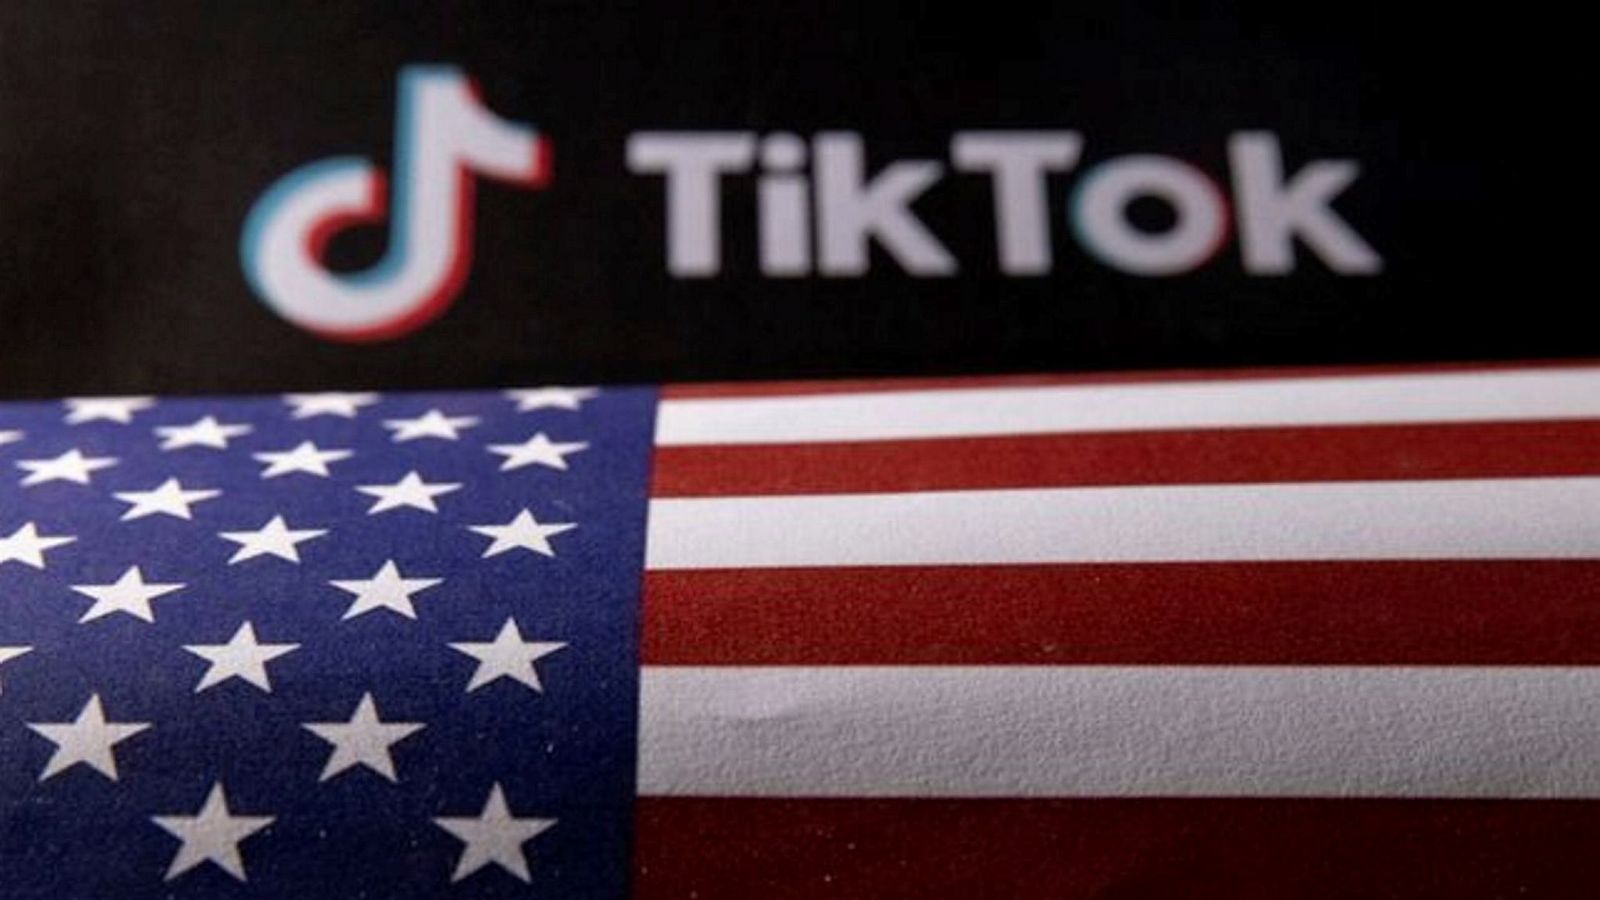 "Could TikTok Be Banned? The Latest Update on U.S. Congress’s Decision and What It Means for Users"